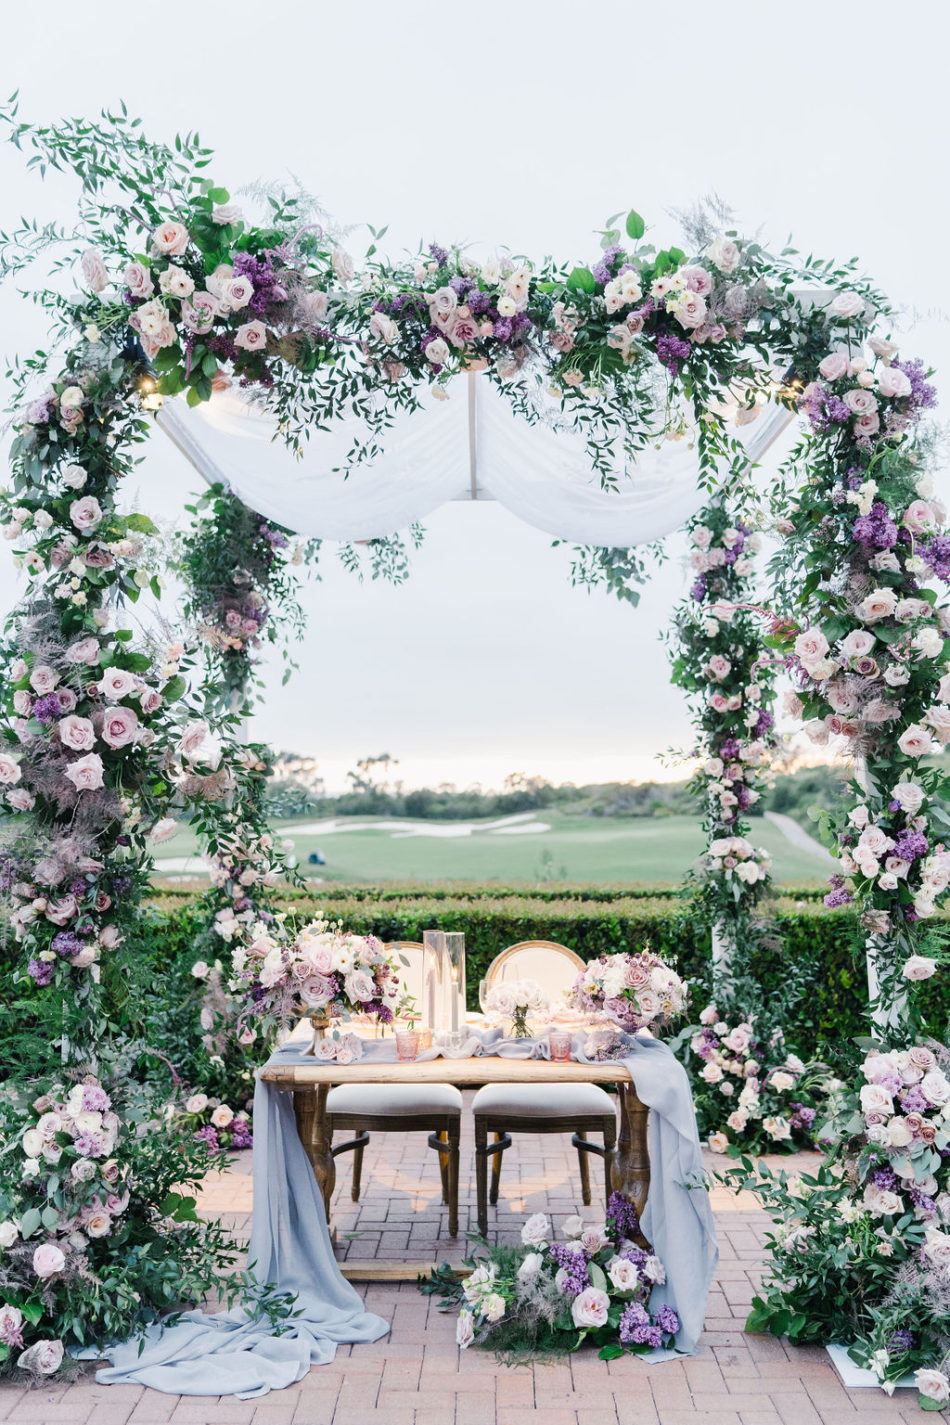 sweetheart table, purple floral decor, best of 2020 finalist, floral design, florist, wedding florist, wedding flowers, orange county weddings, orange county wedding florist, orange county florist, orange county floral design, flowers by cina